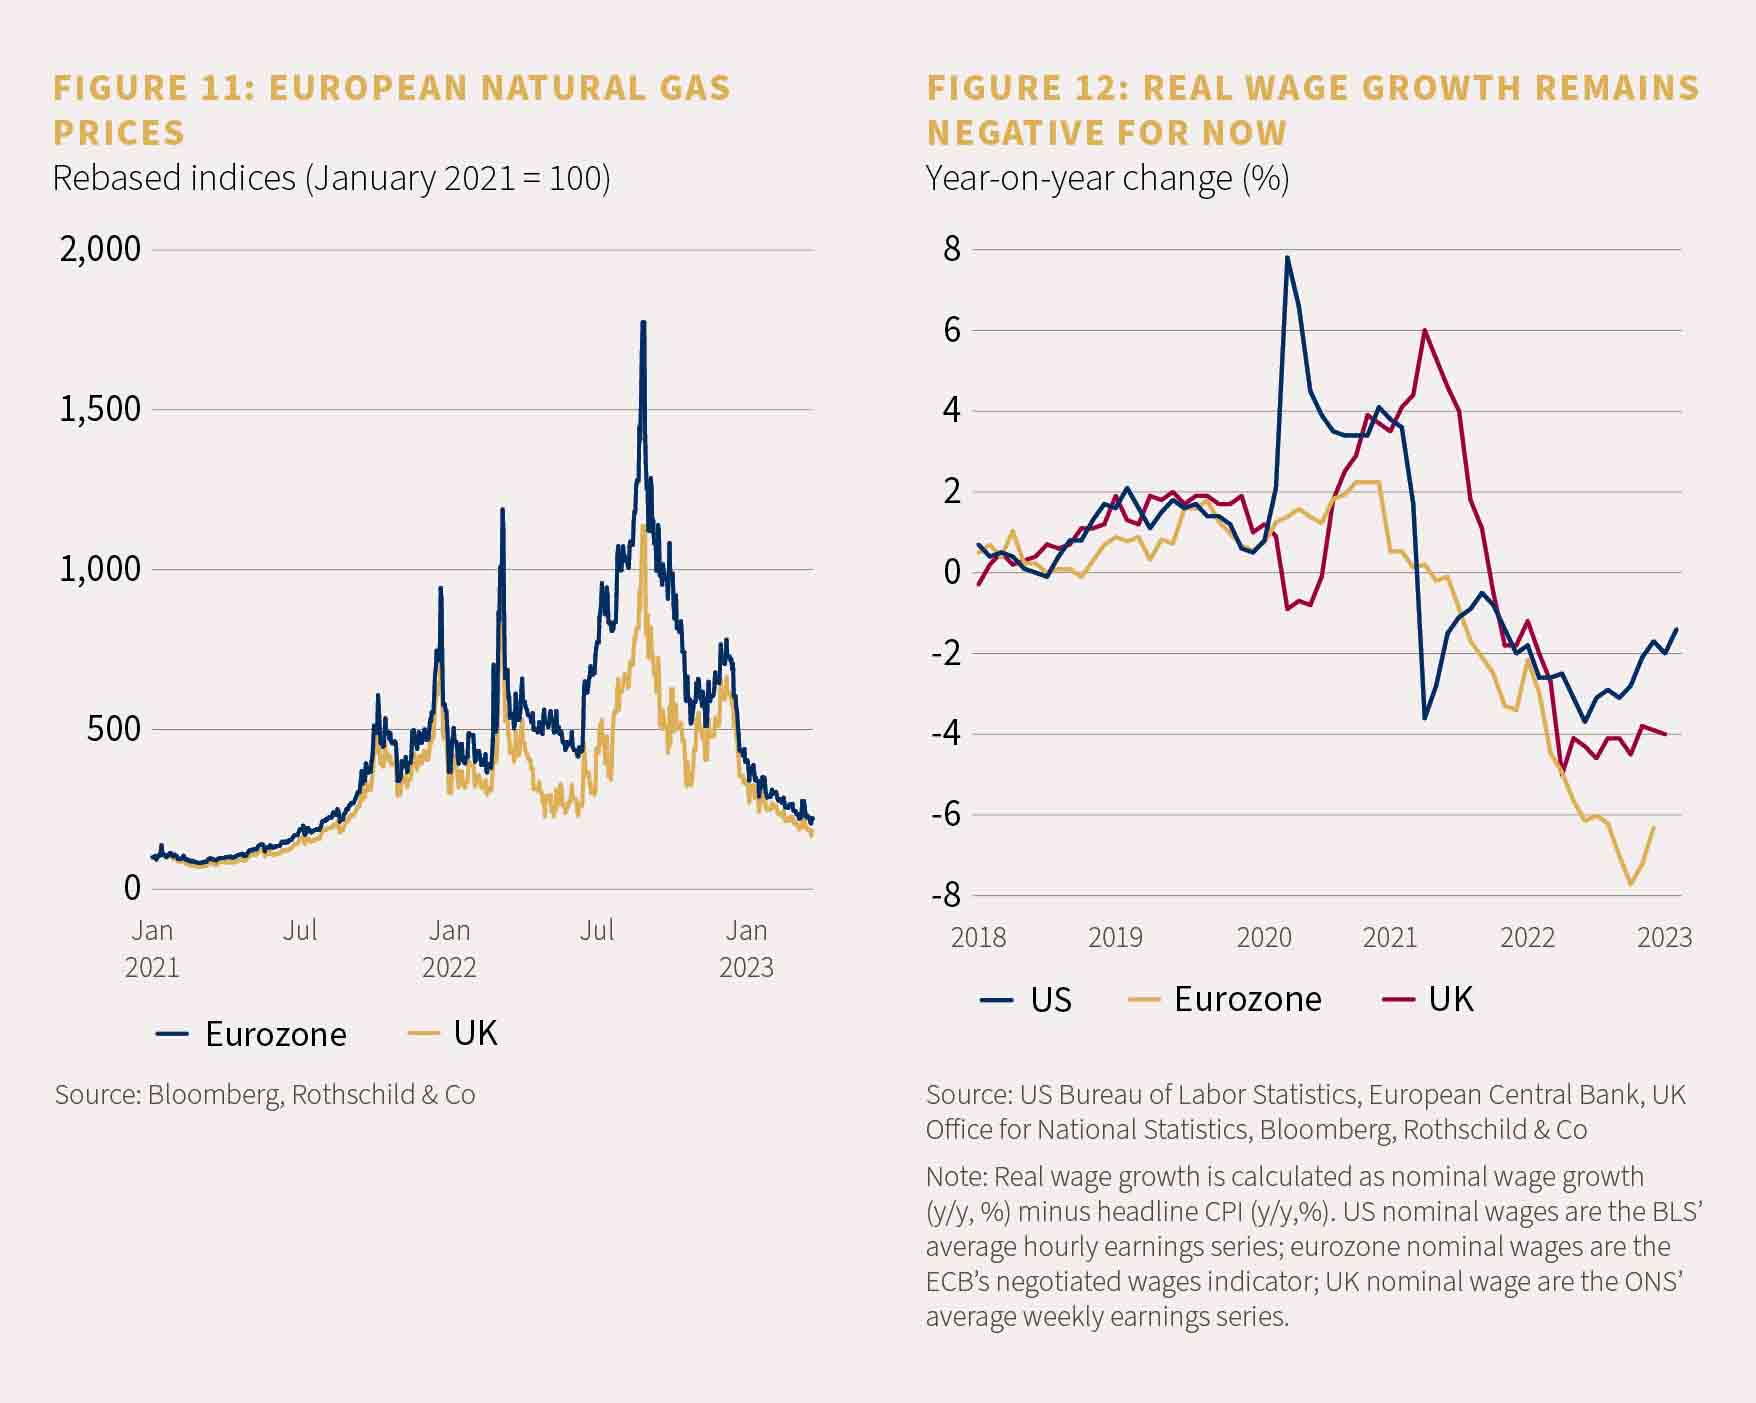 Chart showing European natural gas prices and chart showing real wage growth remaining negative for now